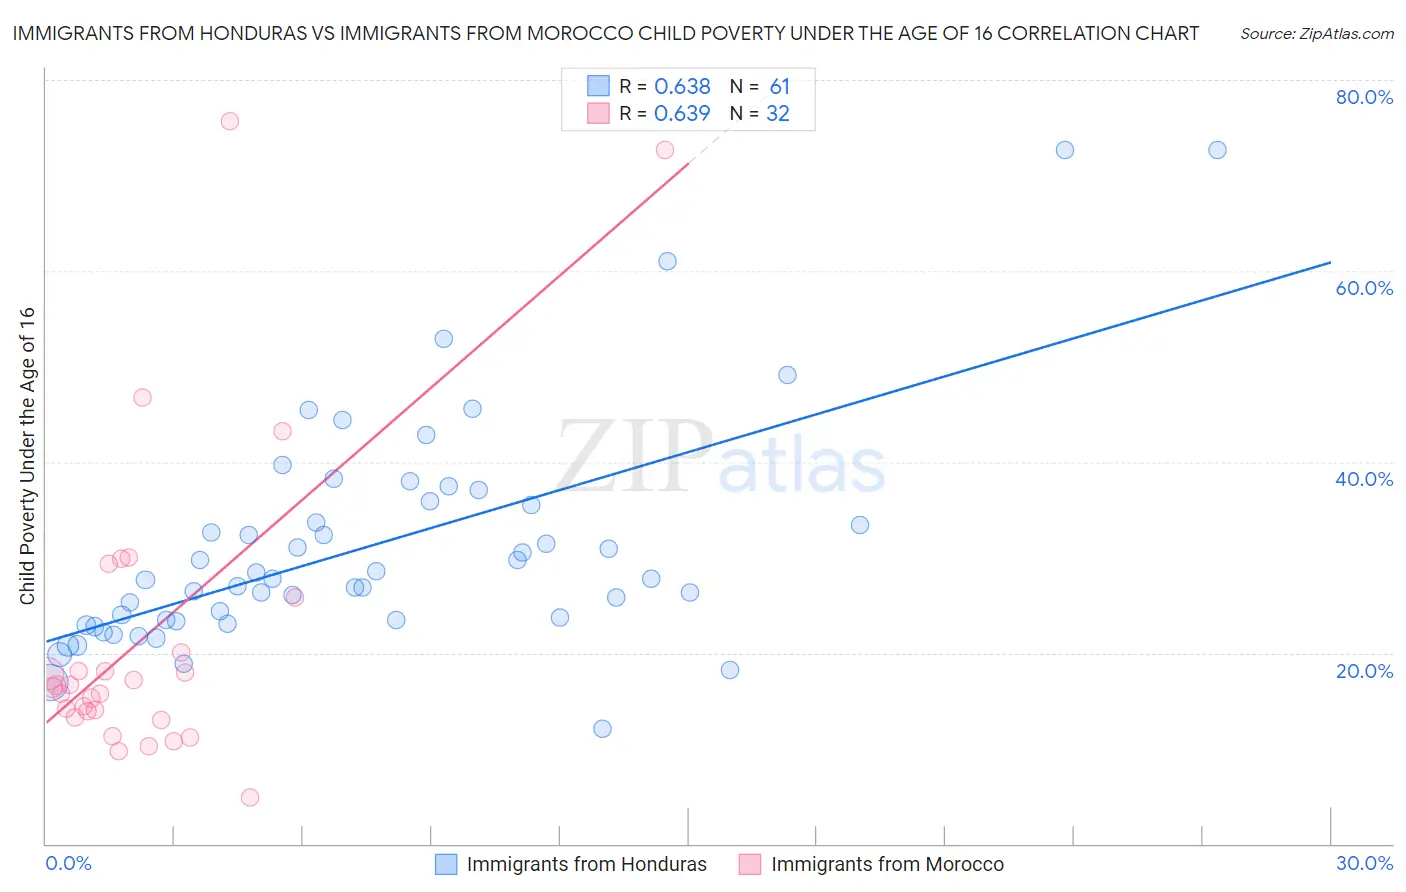 Immigrants from Honduras vs Immigrants from Morocco Child Poverty Under the Age of 16